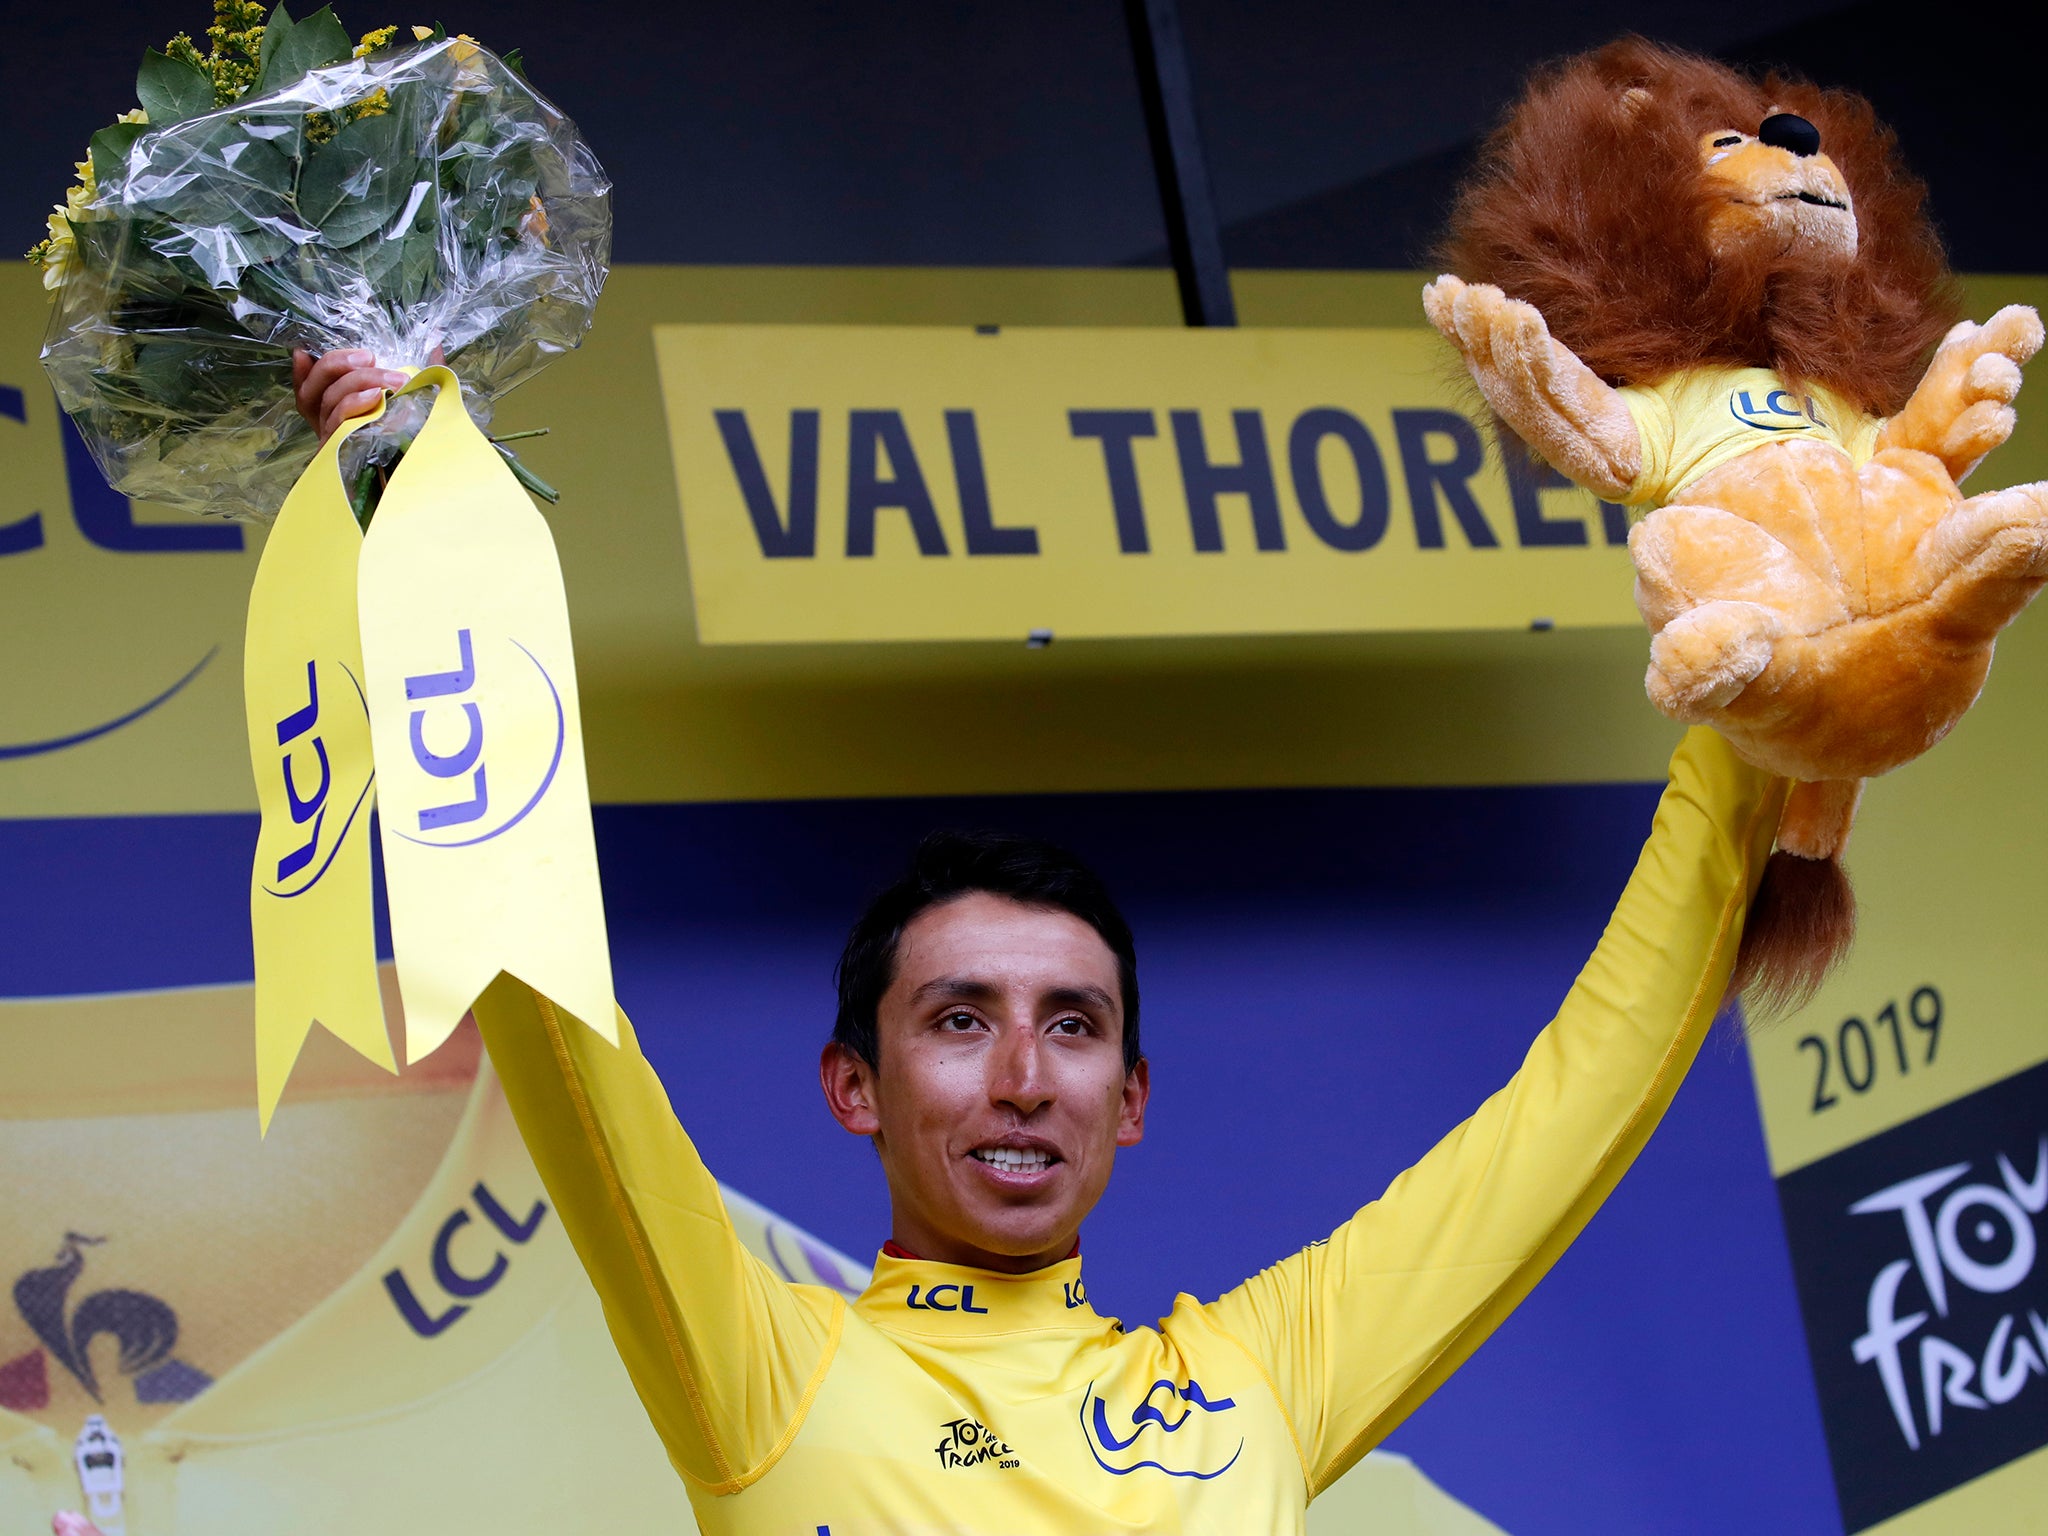 Egan Bernal celebrates his Tour triumph after finishing the penultimate stage more than a minute in front